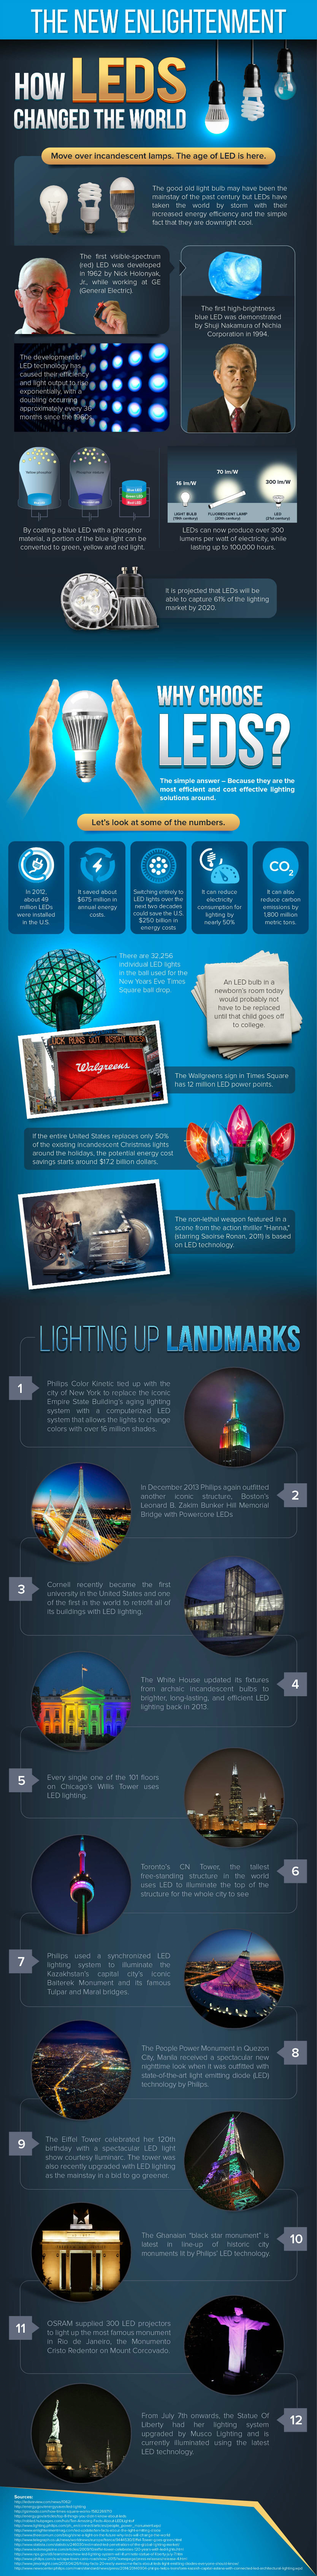 LED-Infographic1-r50